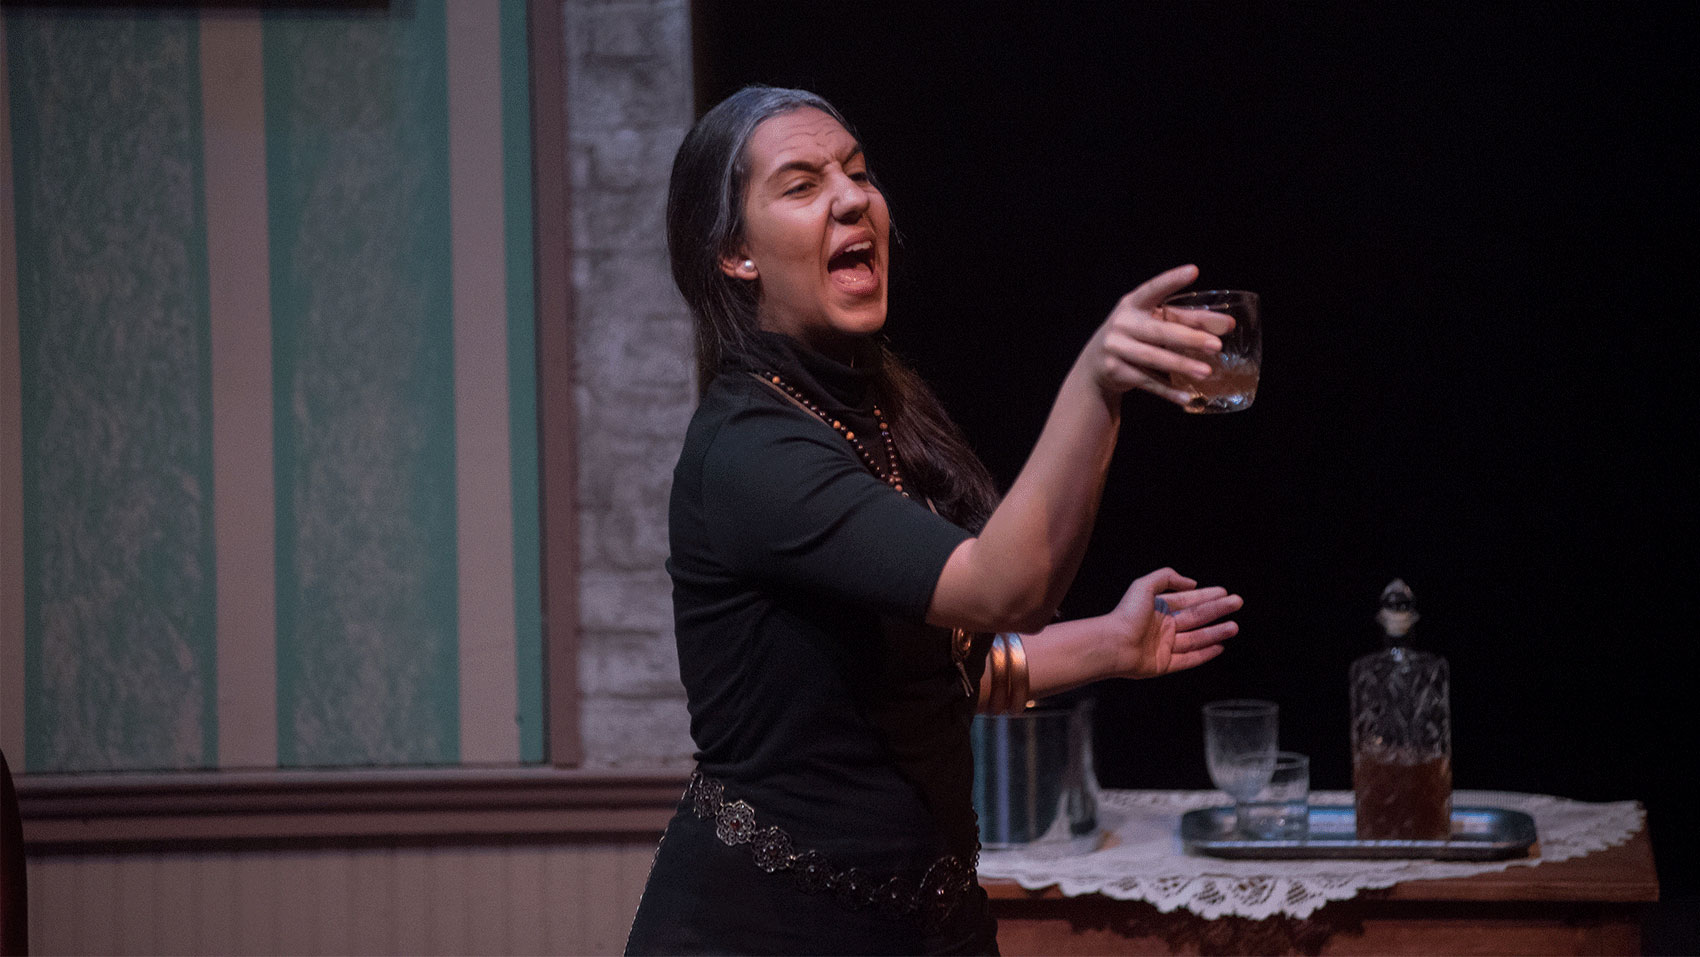 A woman gestures angrily while holding a glass of liquor. 